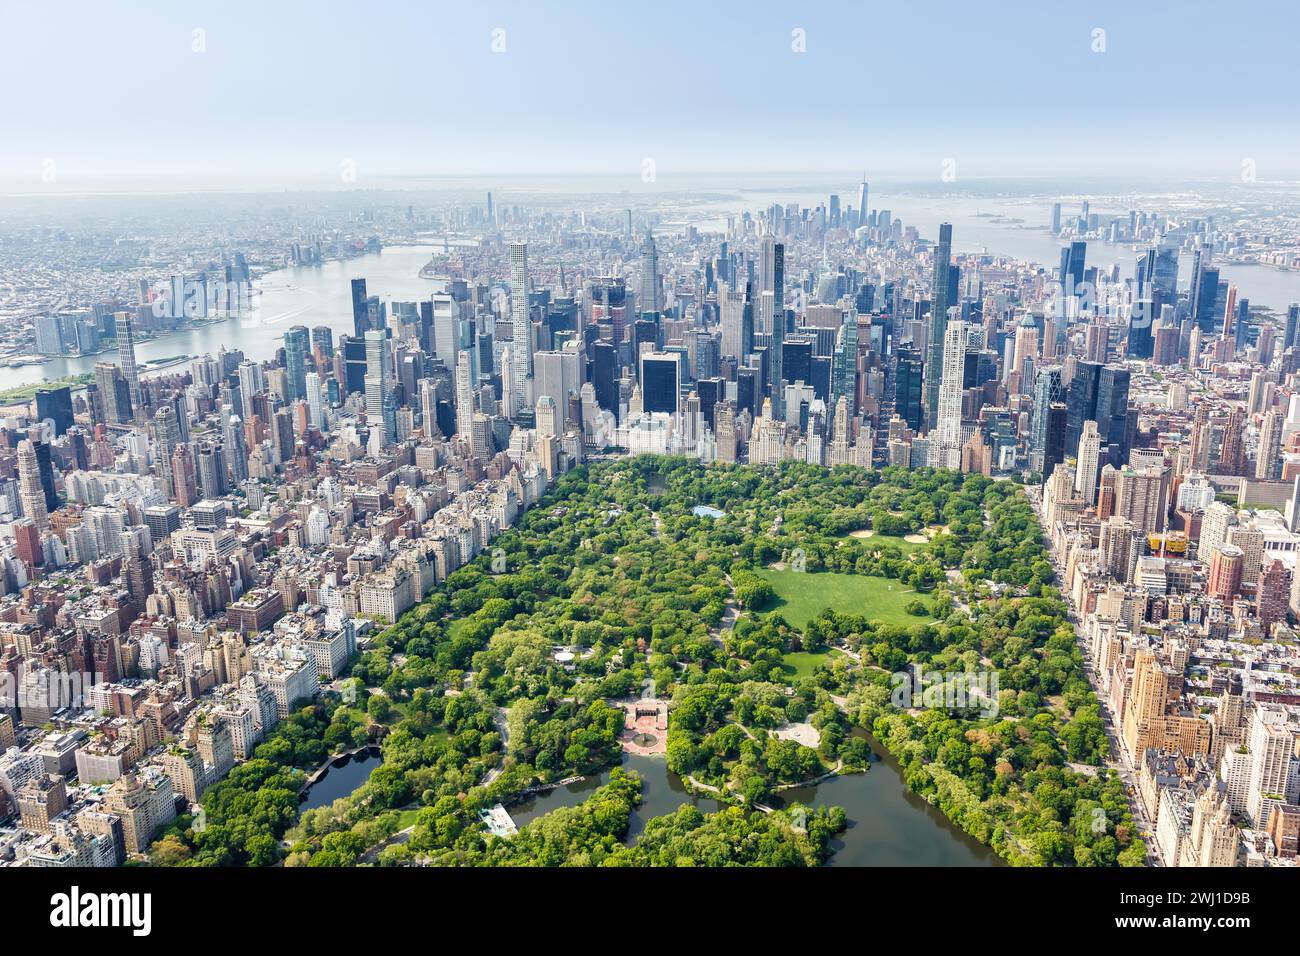 New York City skyline real estate skyscrapers of Manhattan with Central Park aerial view in the USA Stock Photo